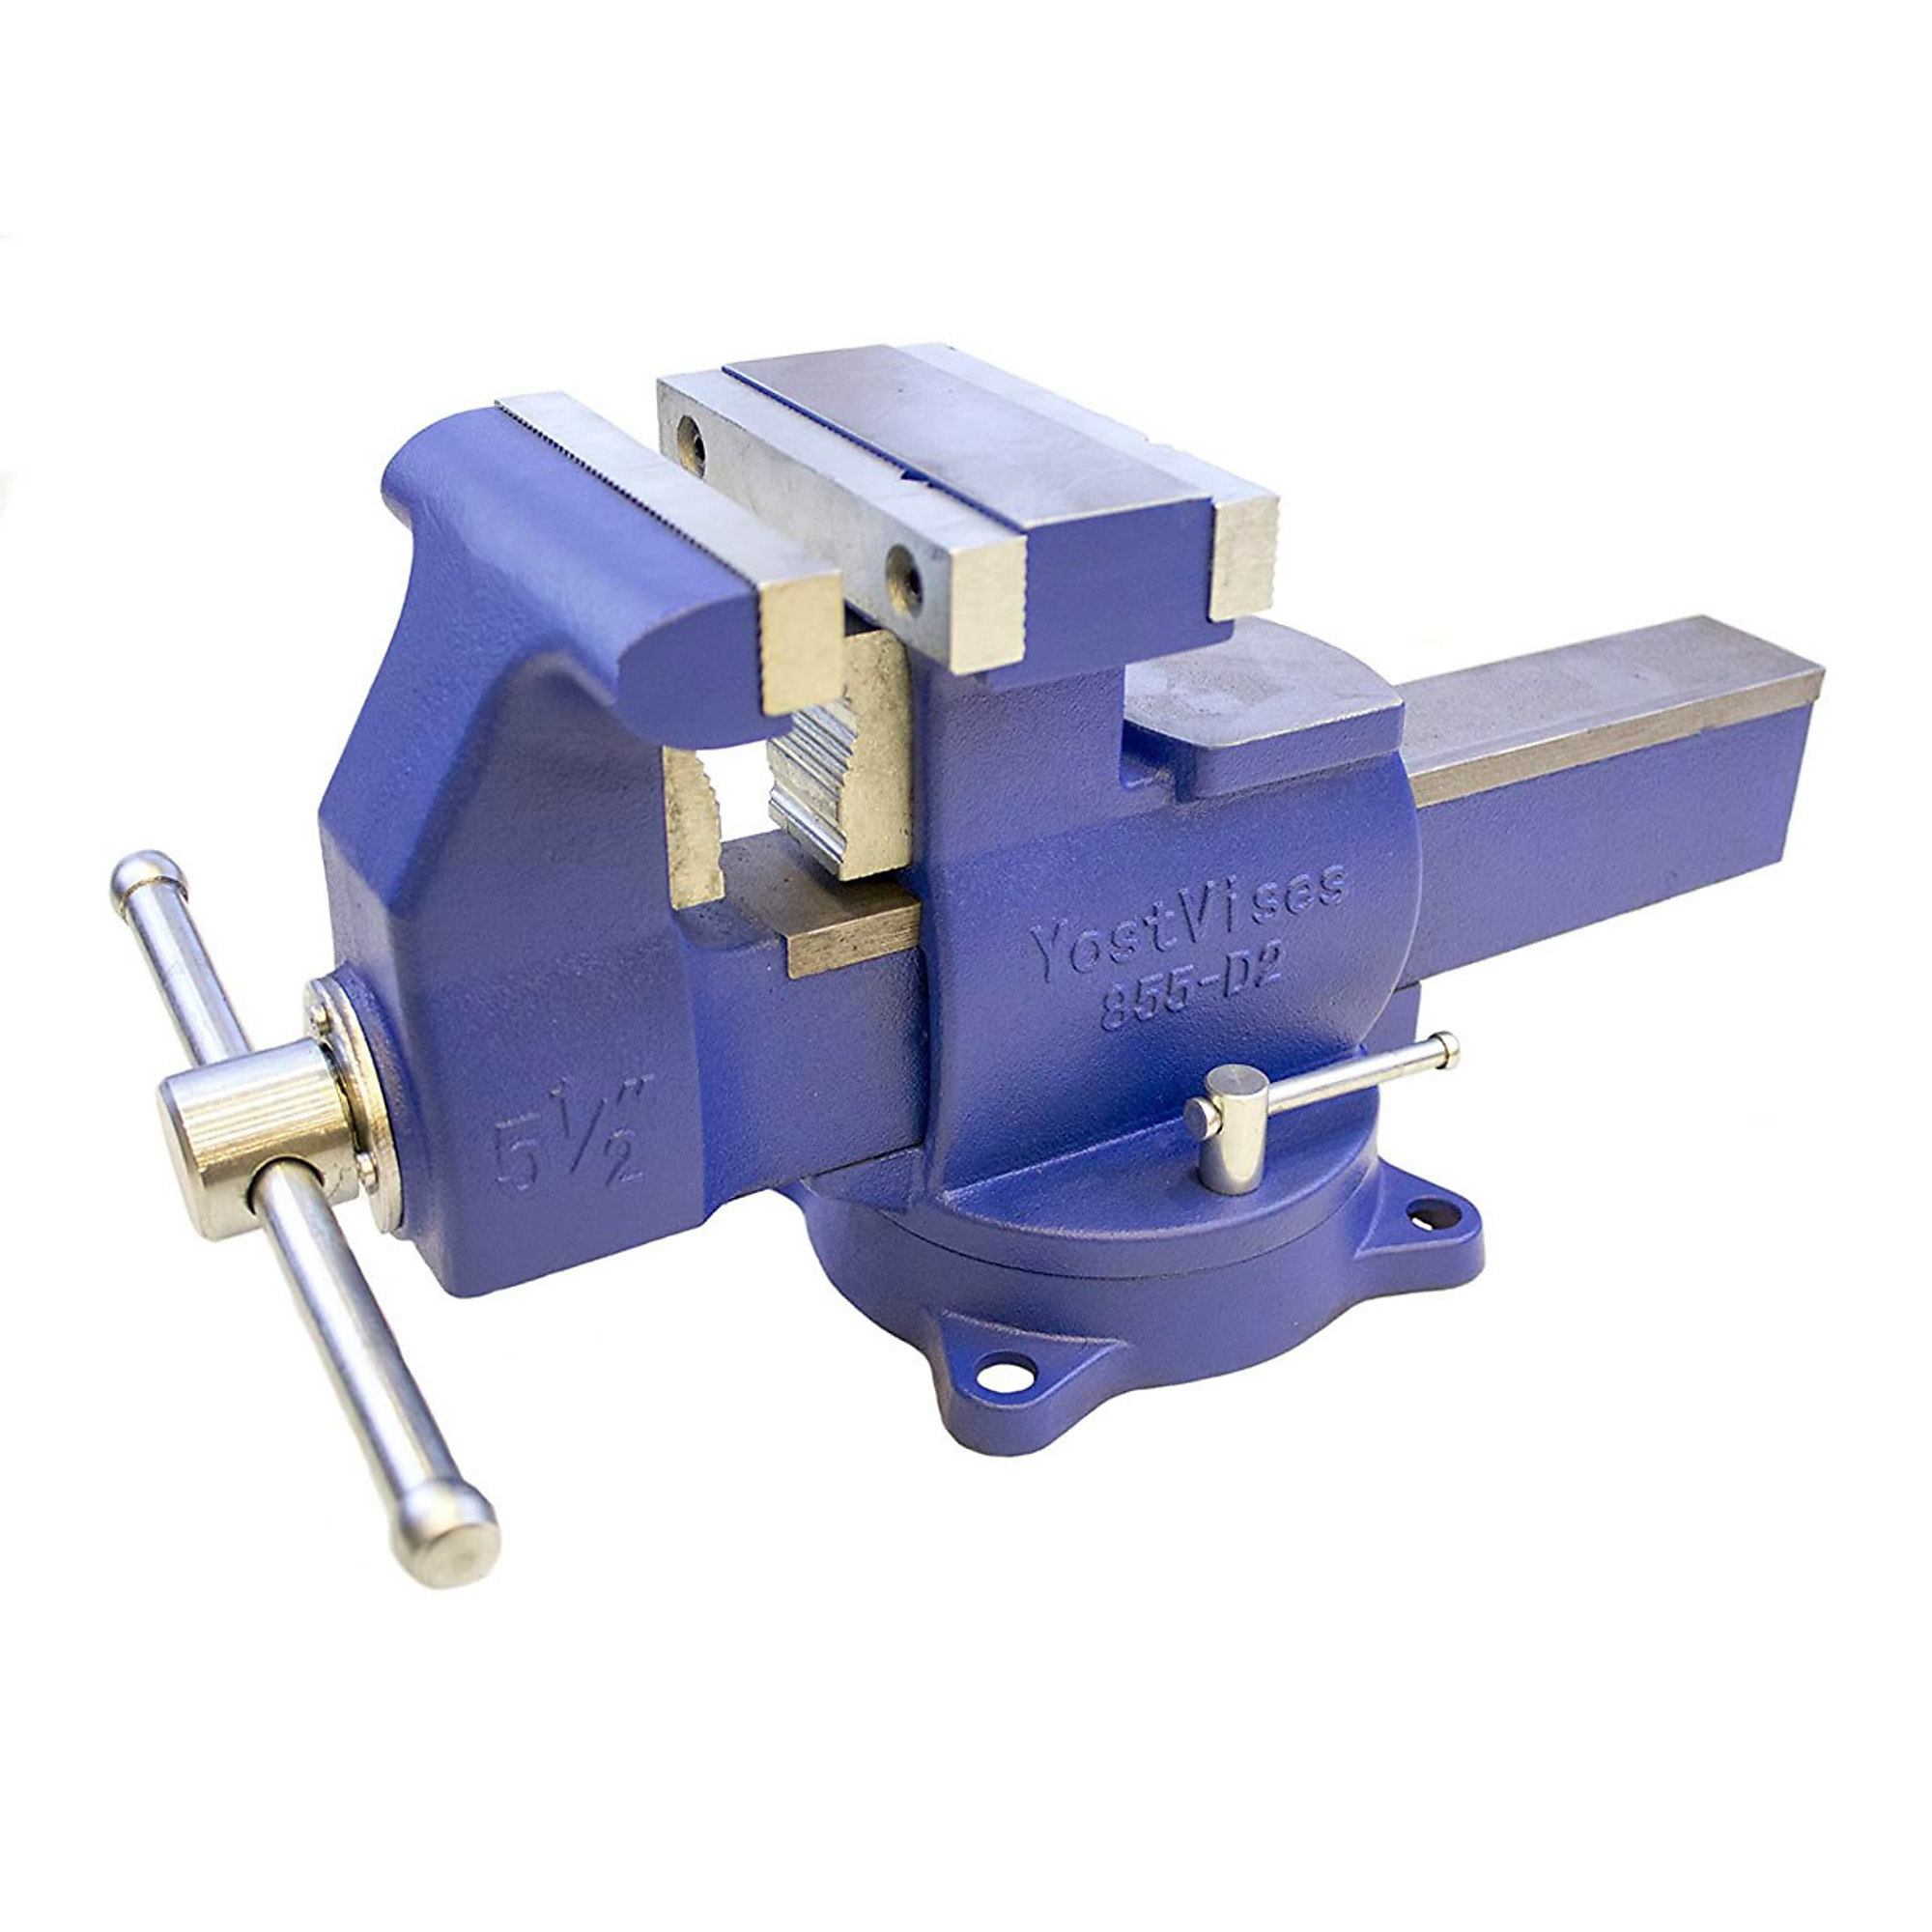 Yost Vises, 5.5Inch Reversible Combo Vise, Jaw Width 5.5 in, Jaw Capacity 6 in, Material Ductile Iron, Model 855-D2 -  56488